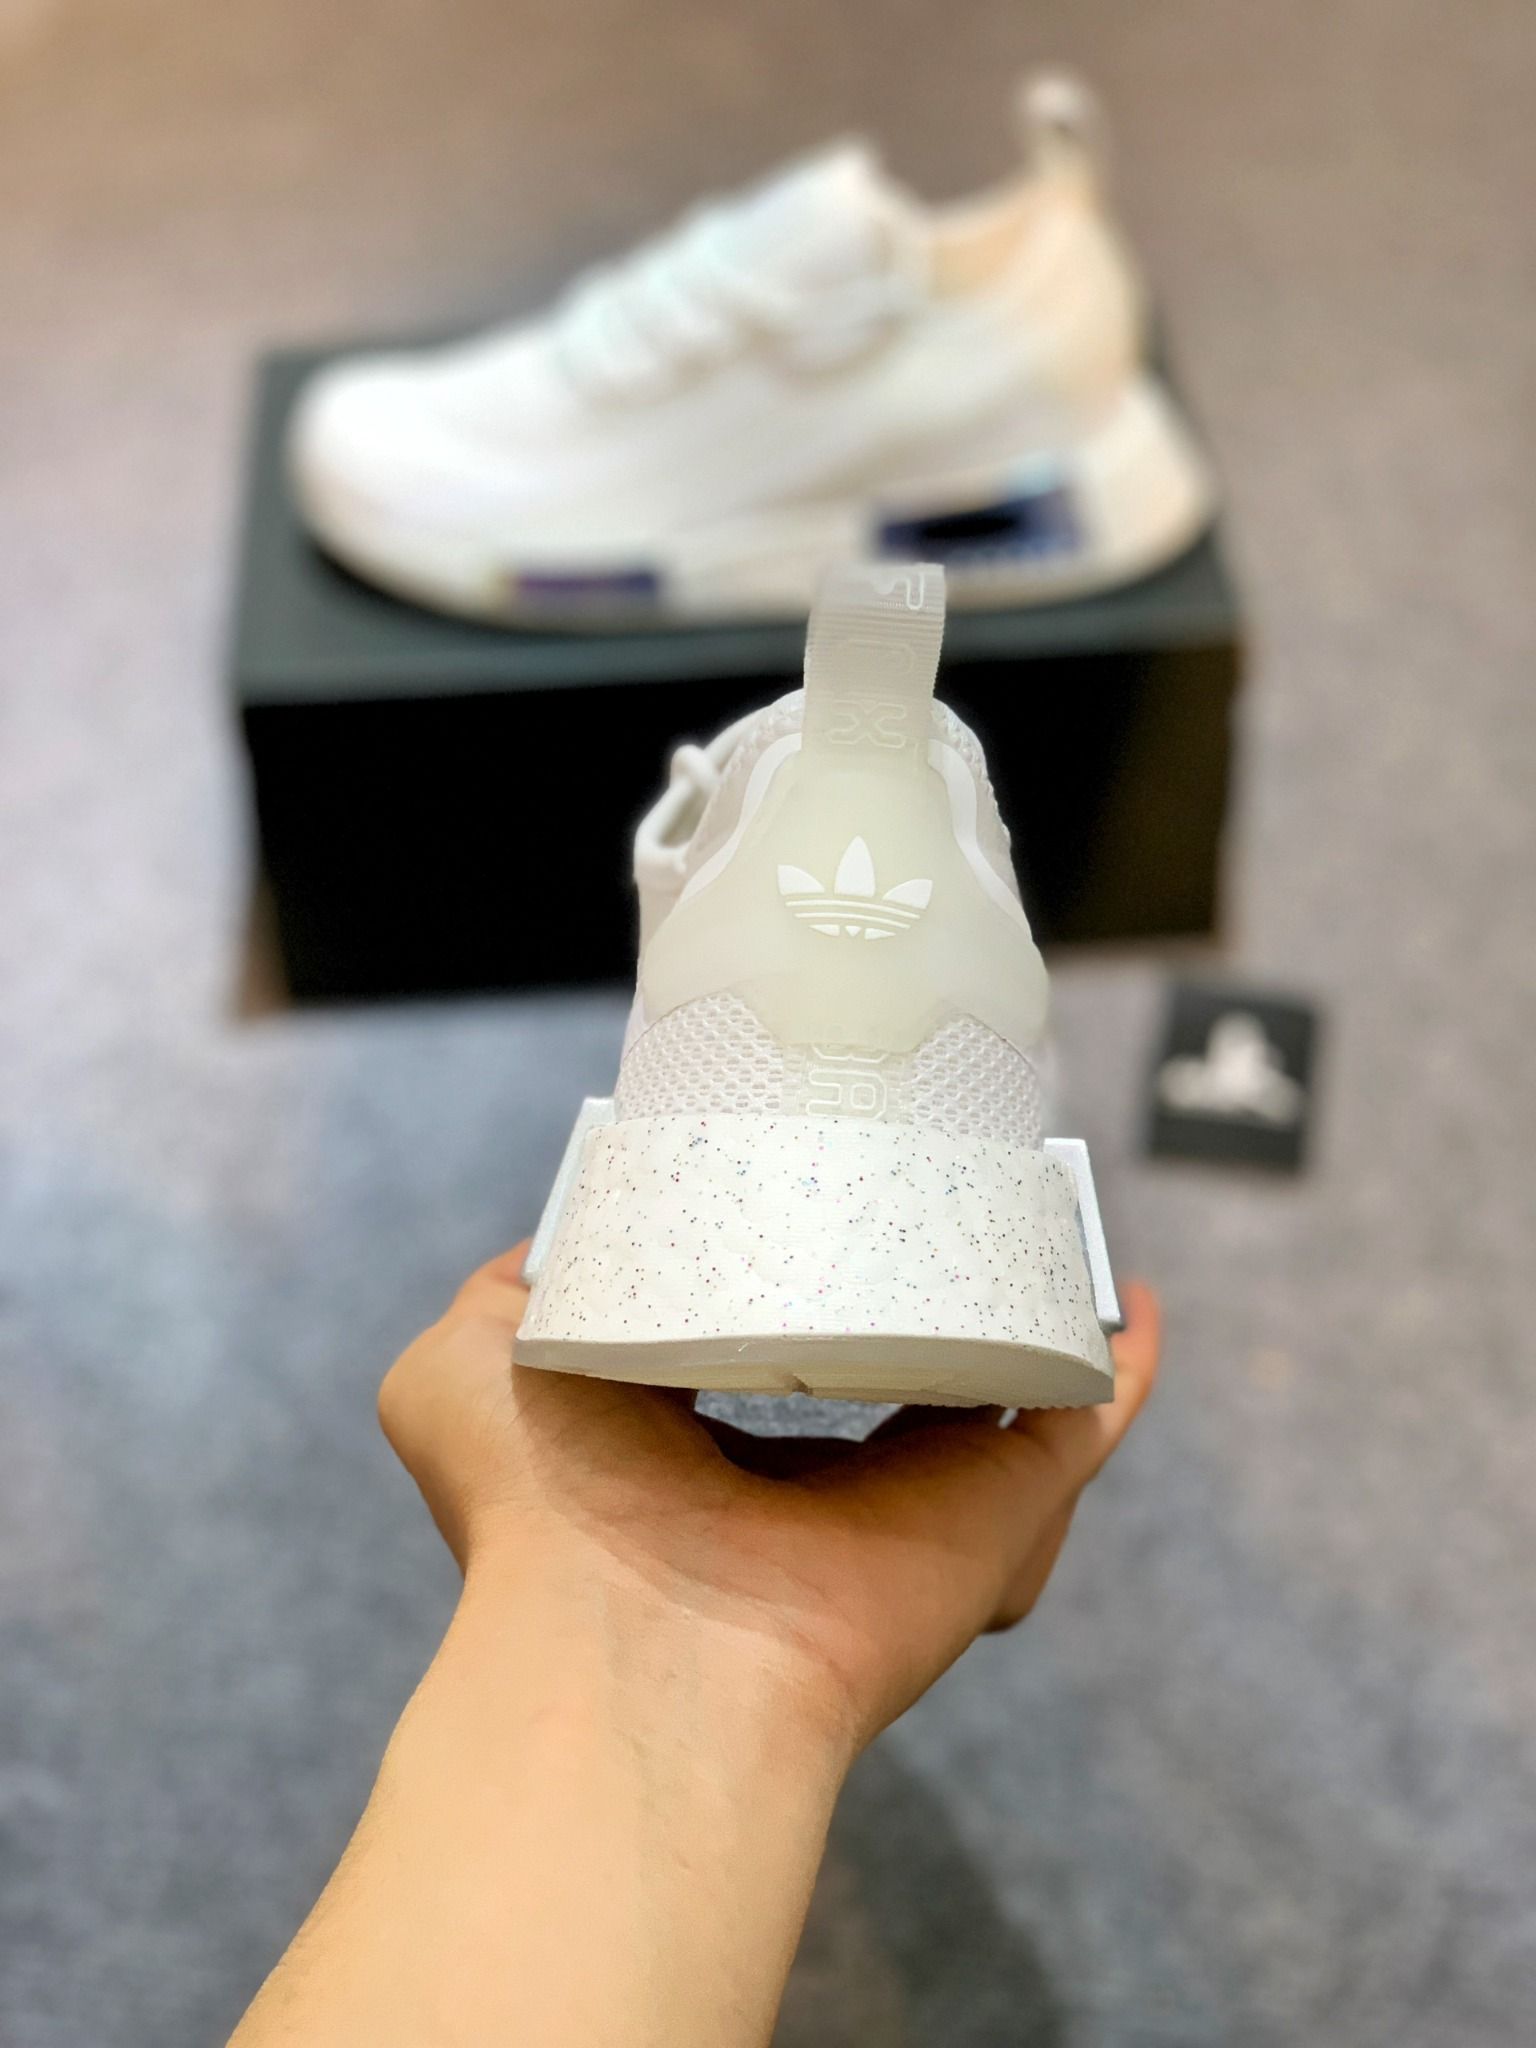  GZ9289 NMD R1 Spectoo White Iridescent 